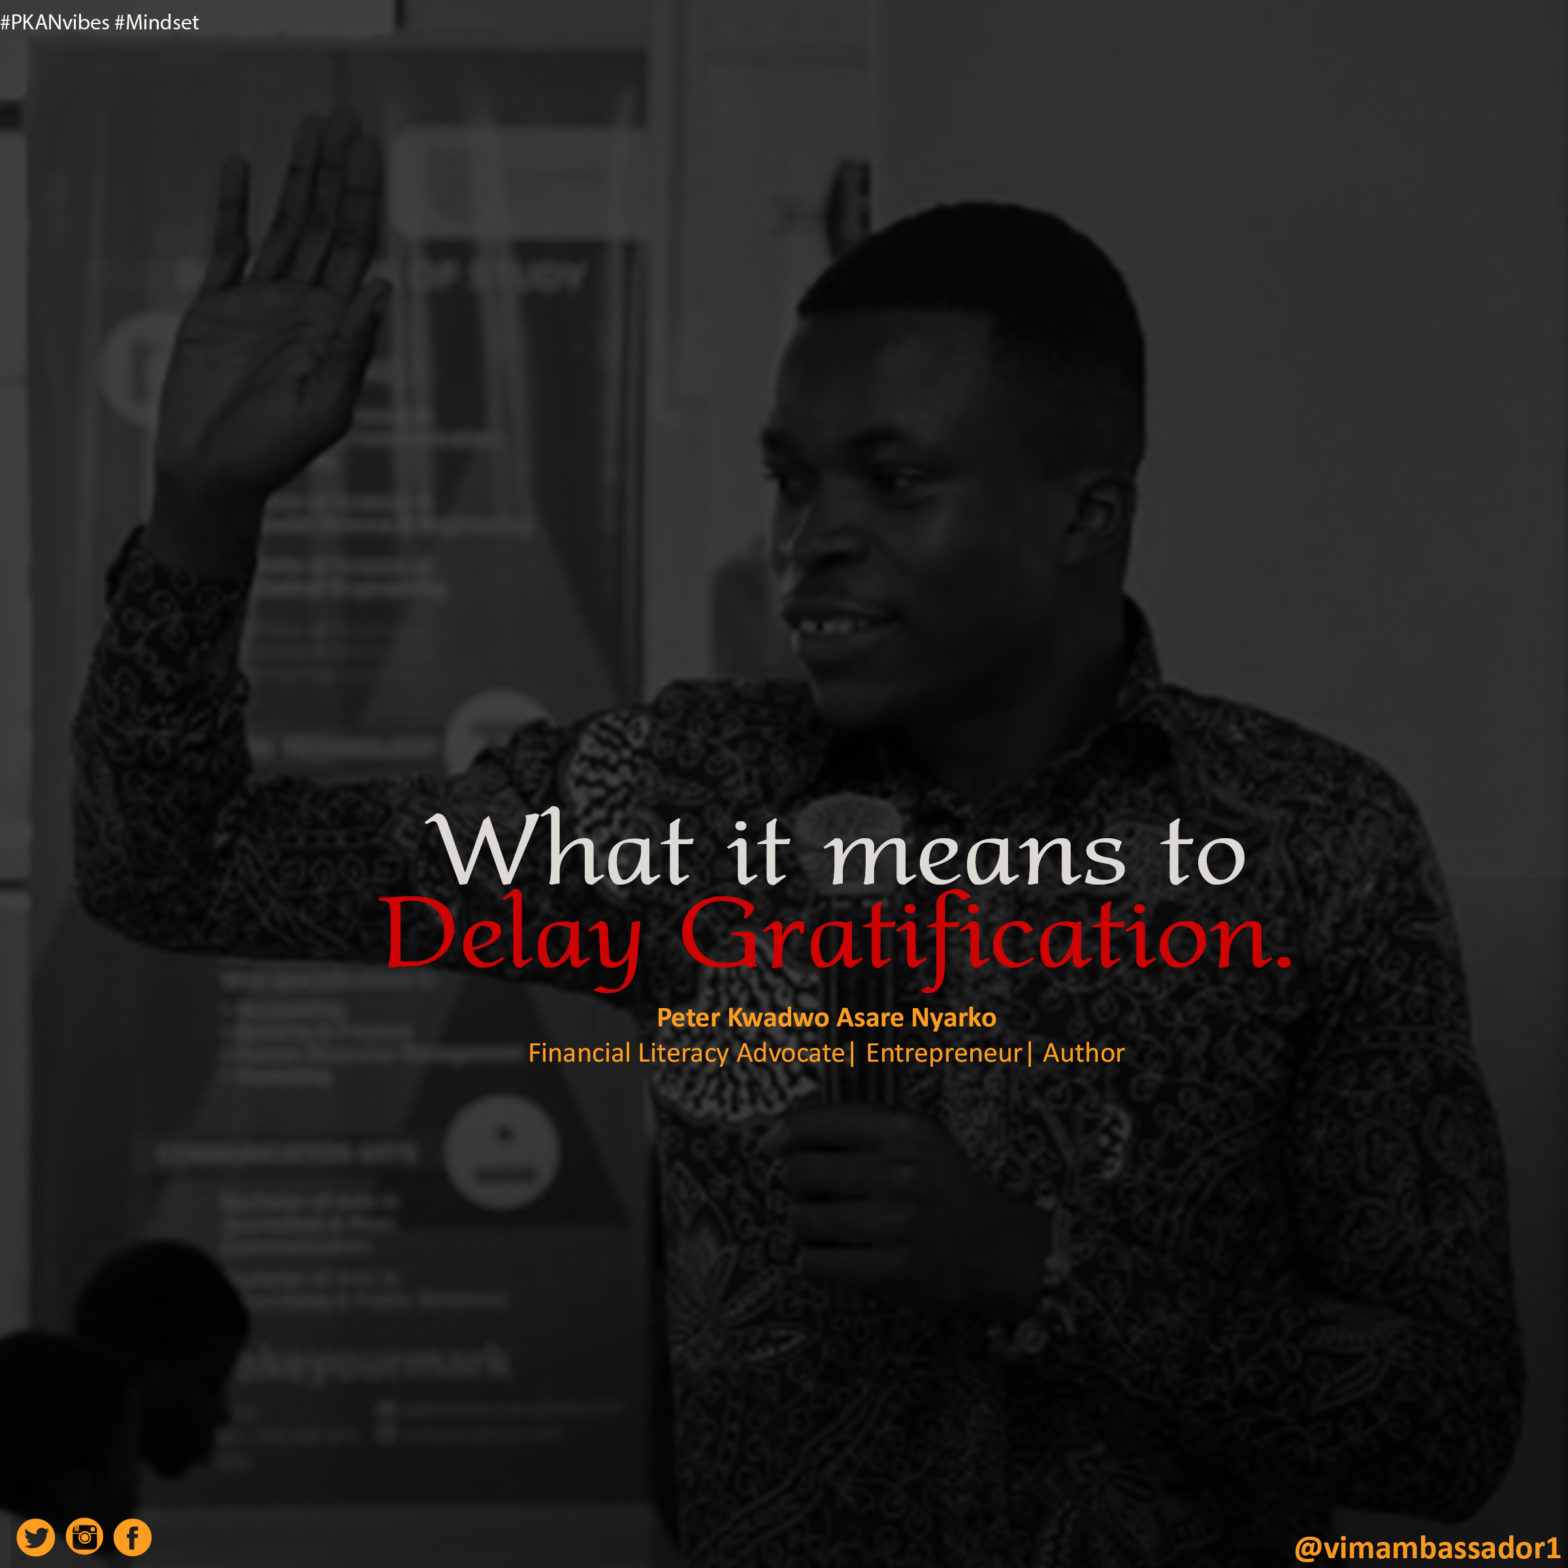 What it means to Delay Gratification